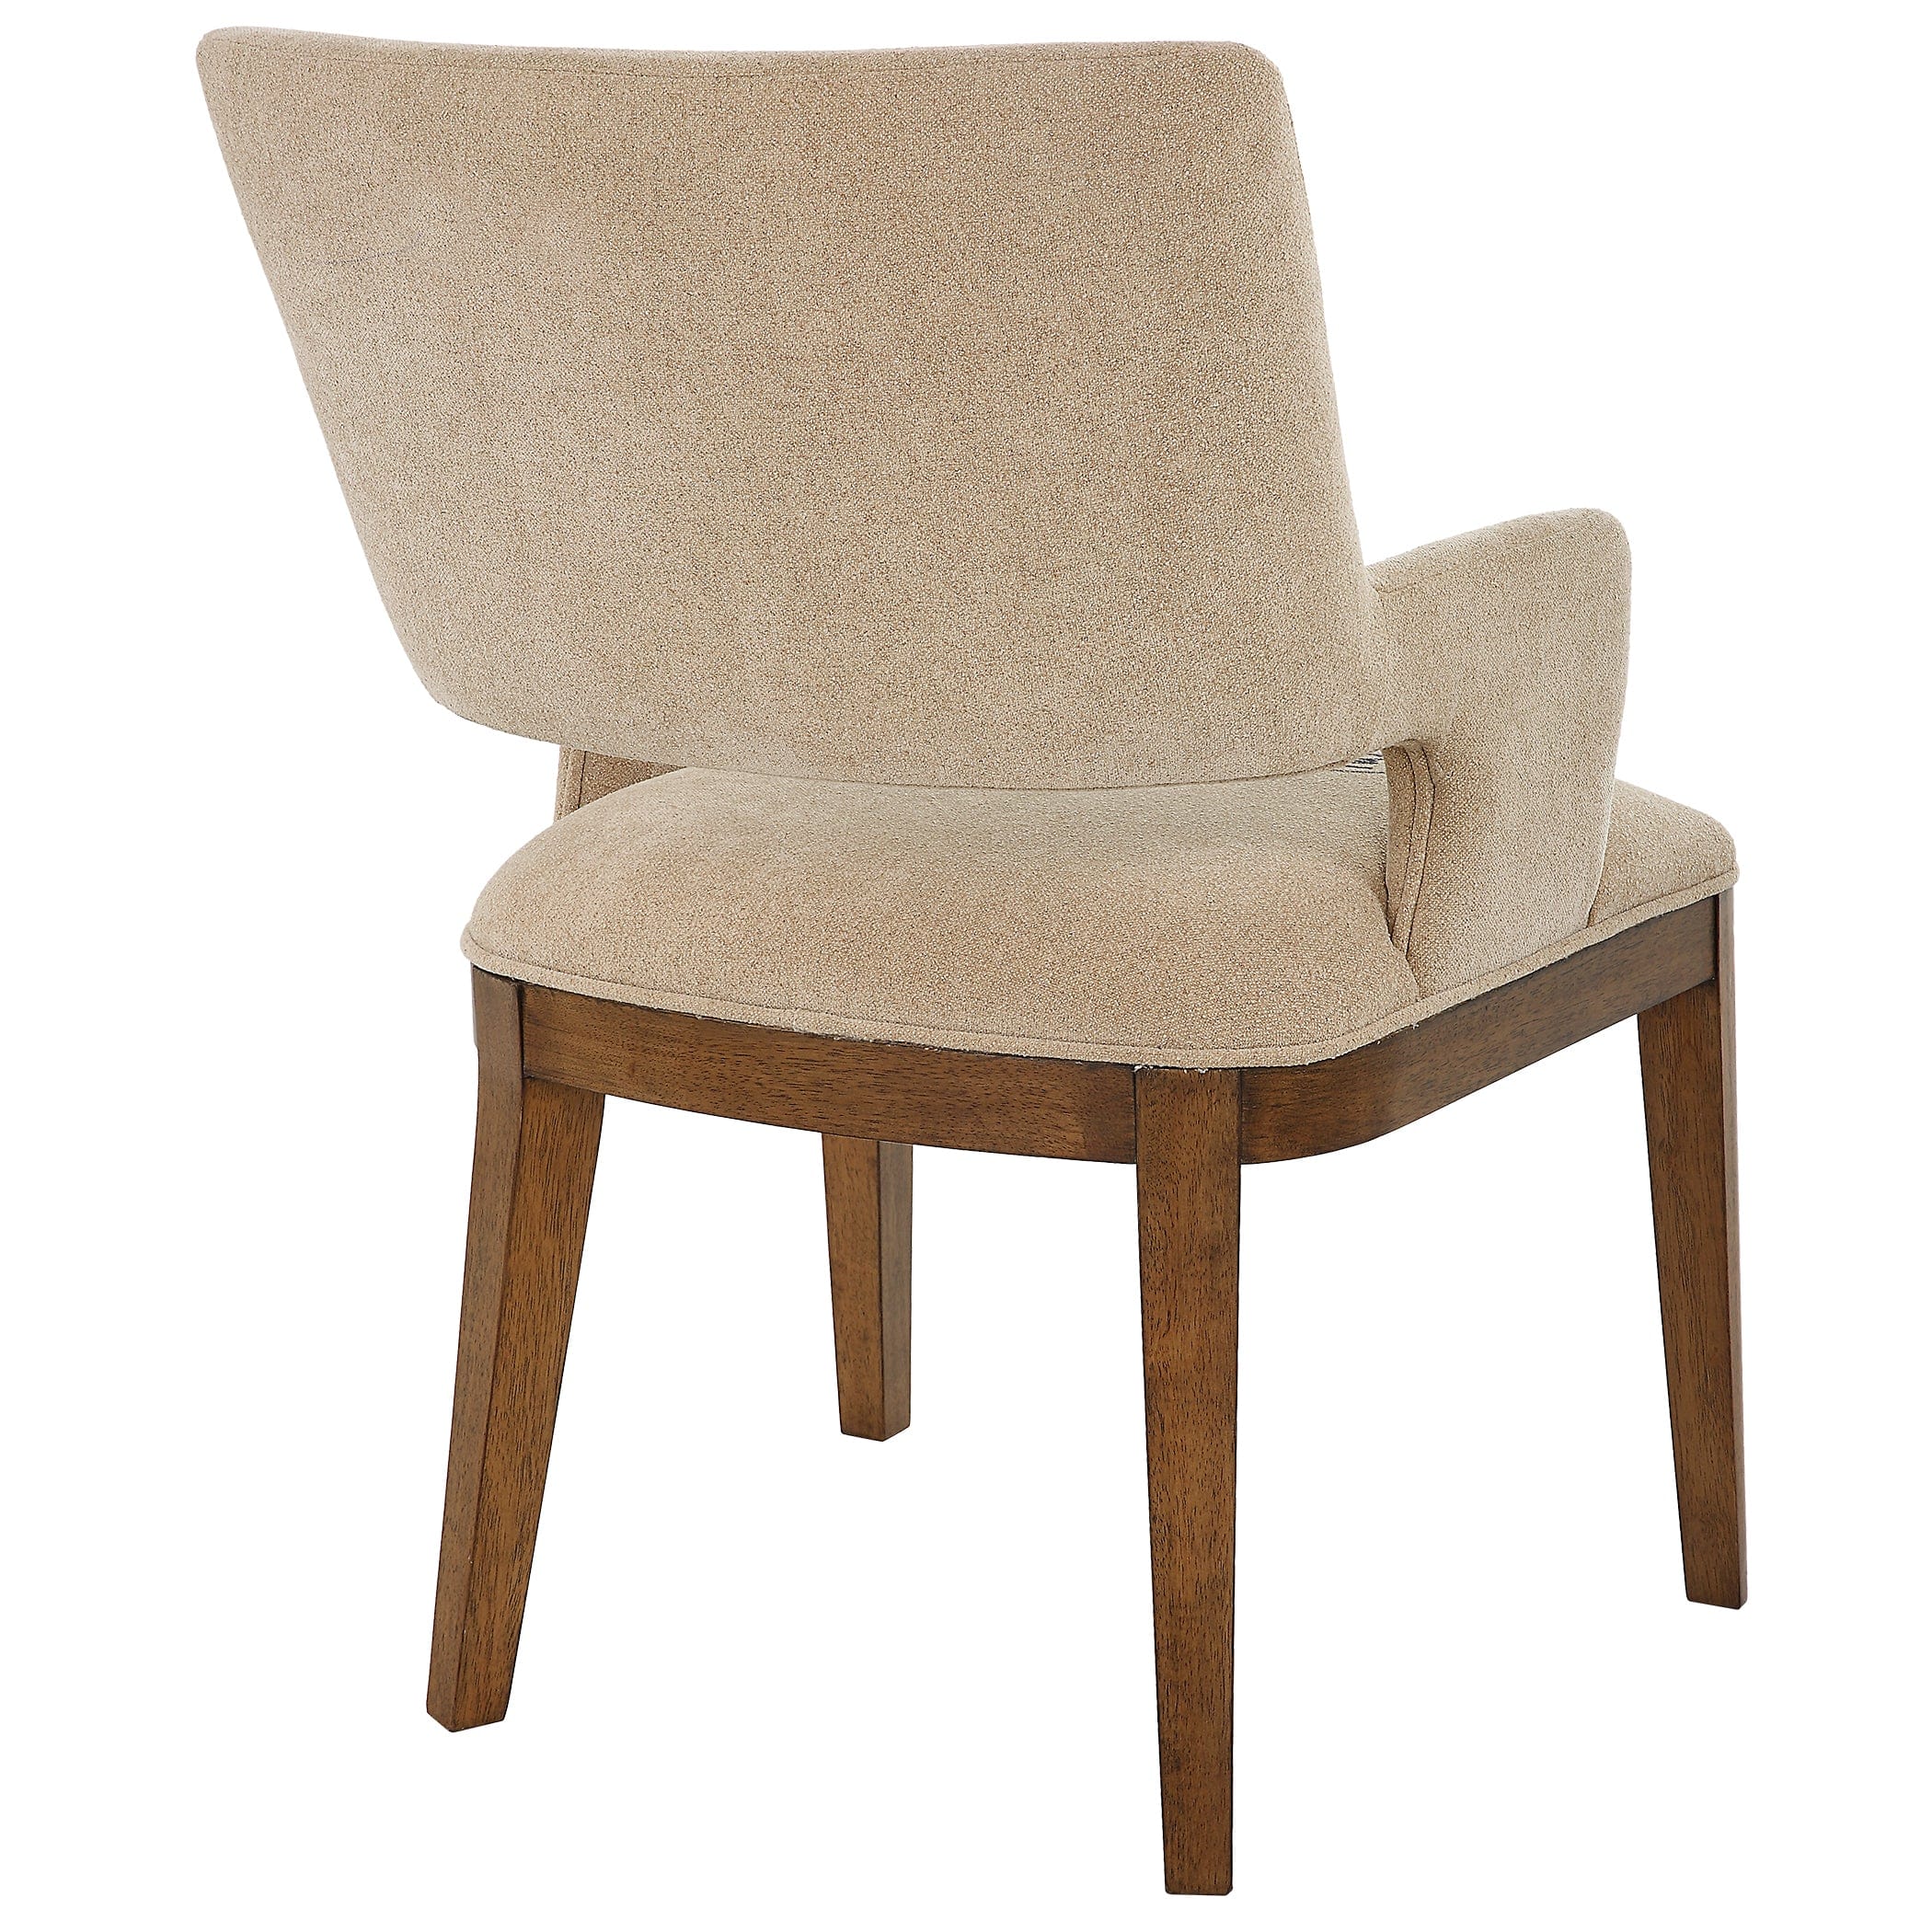 Aspect Mid-Century Dining Chair Uttermost